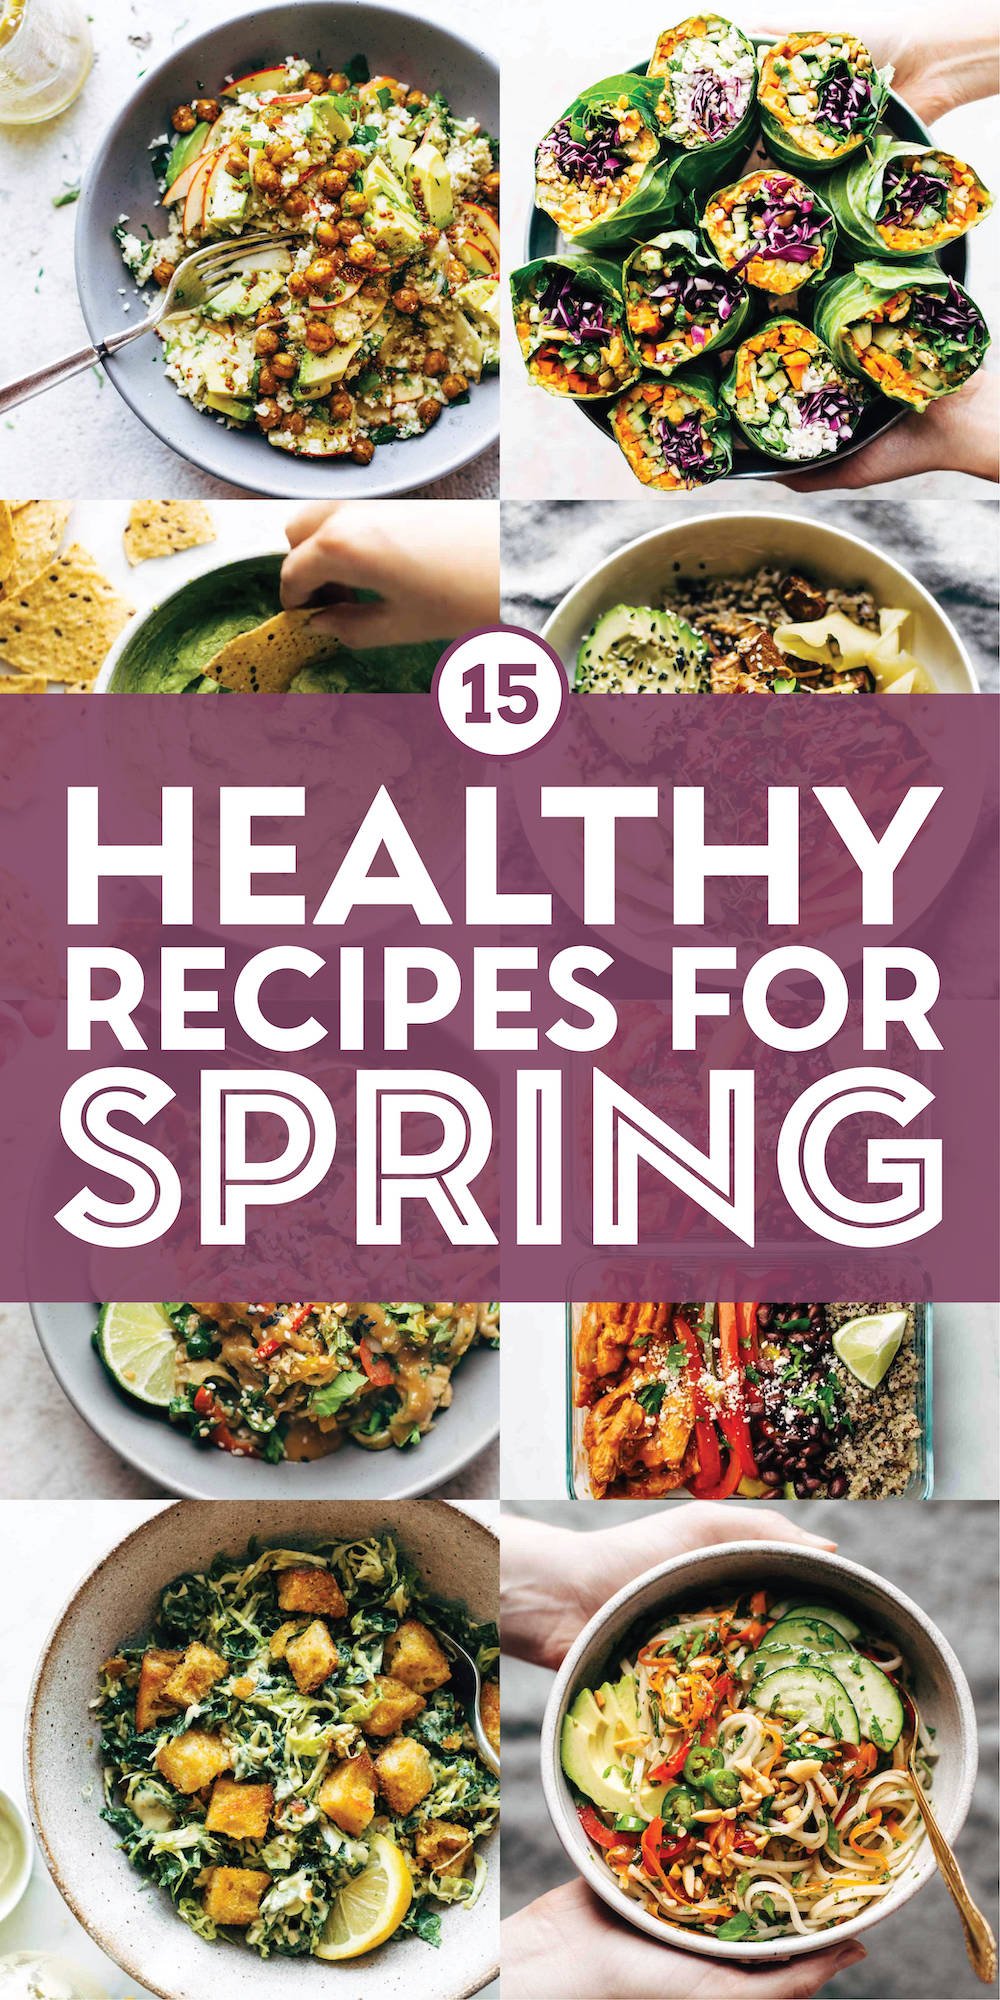 Healthy spring recipes in a collage.